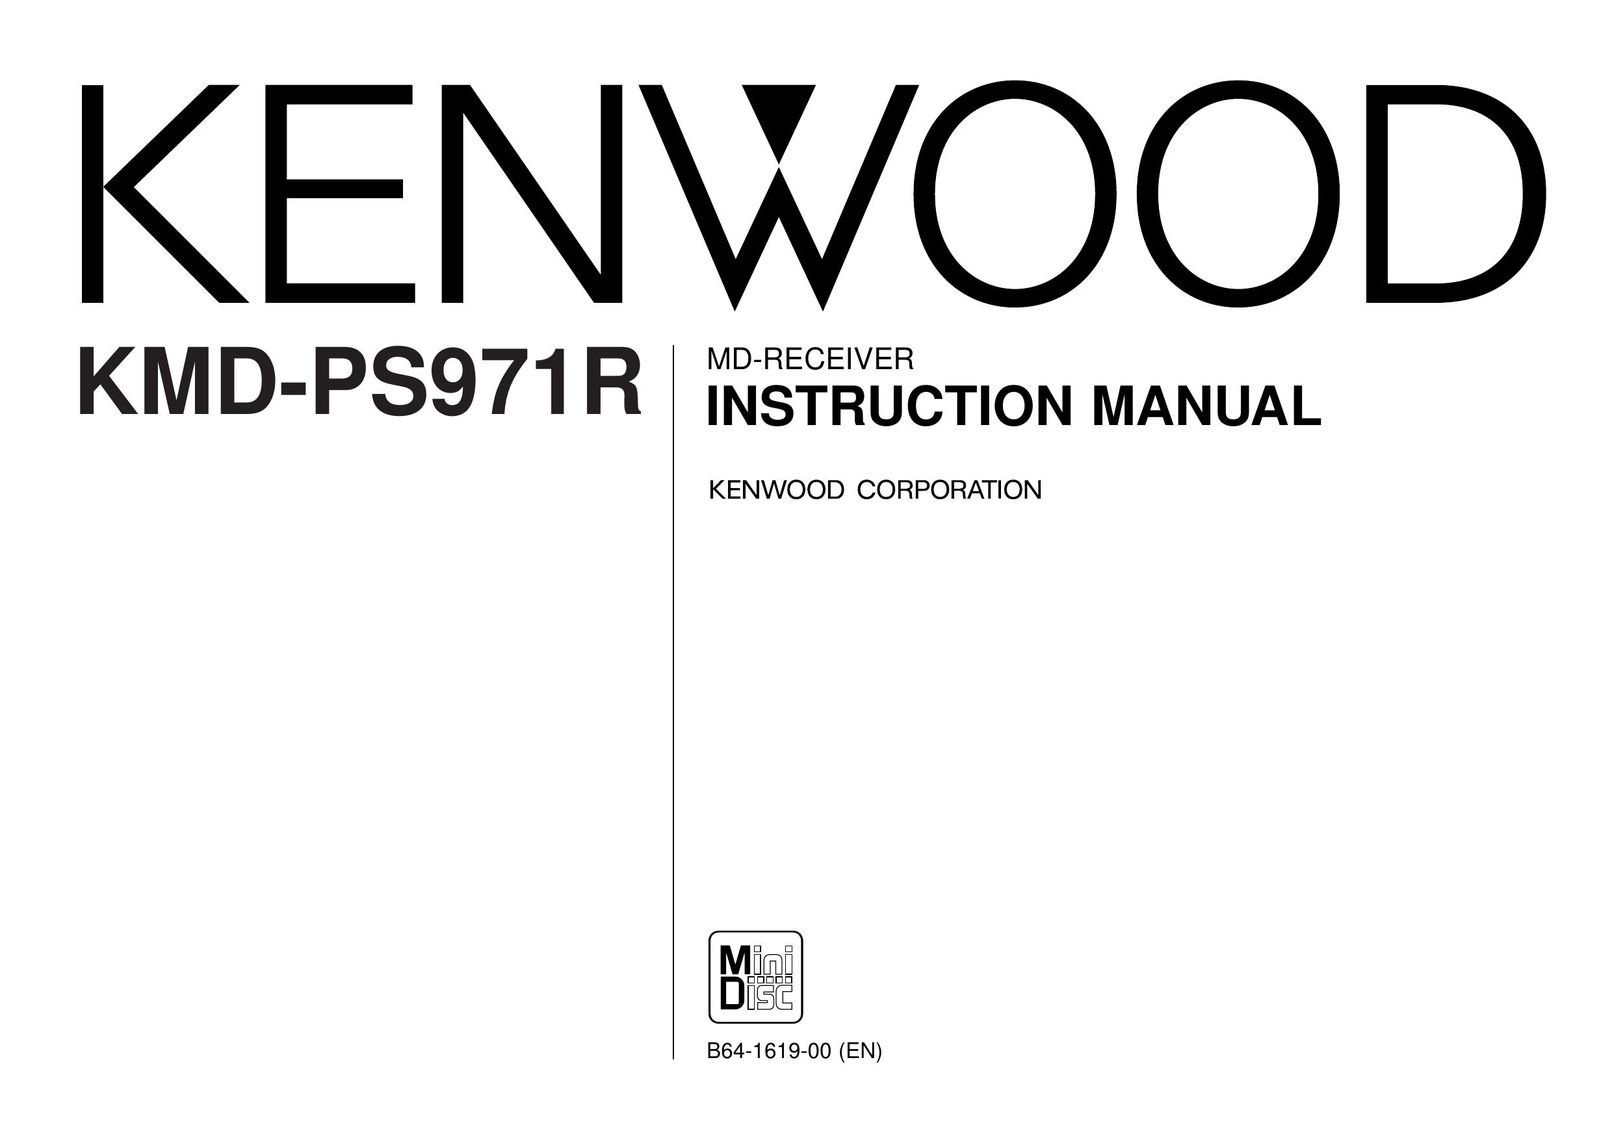 Kenwood KMD-PS971R Stereo Receiver User Manual